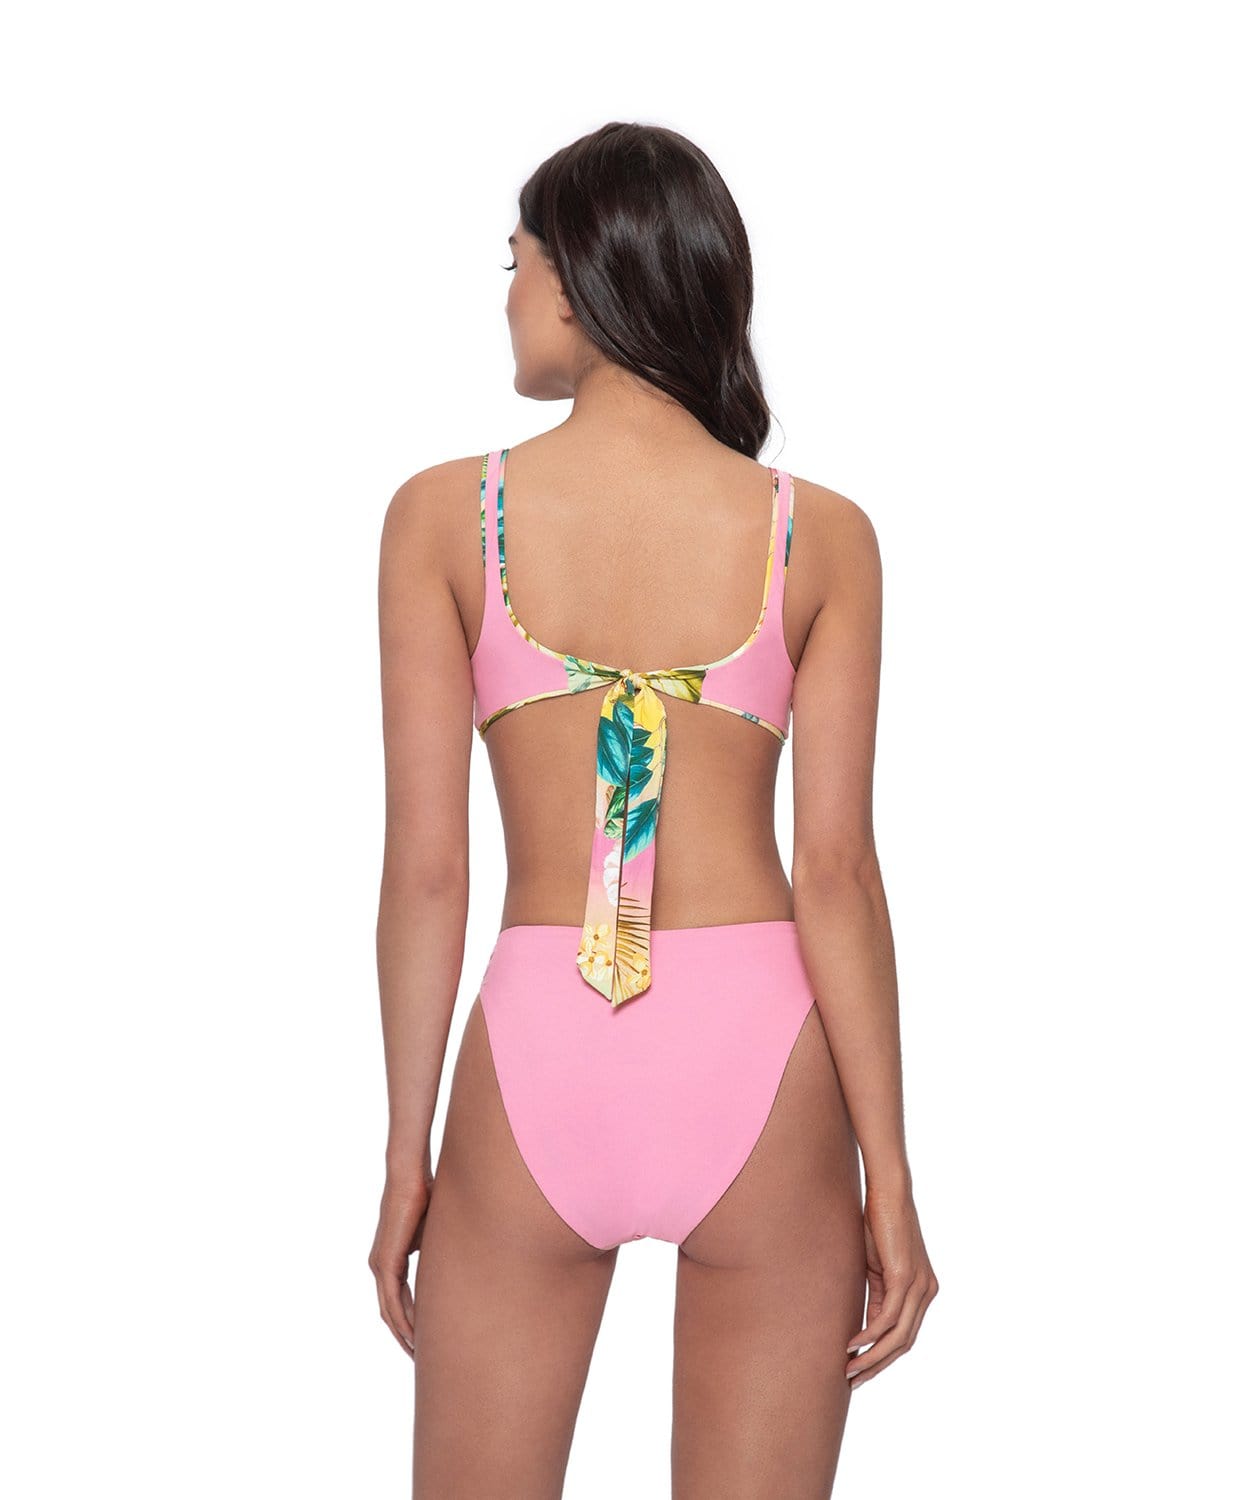 This swimsuit bottom is going to be - ZYIA Active Ind Rep